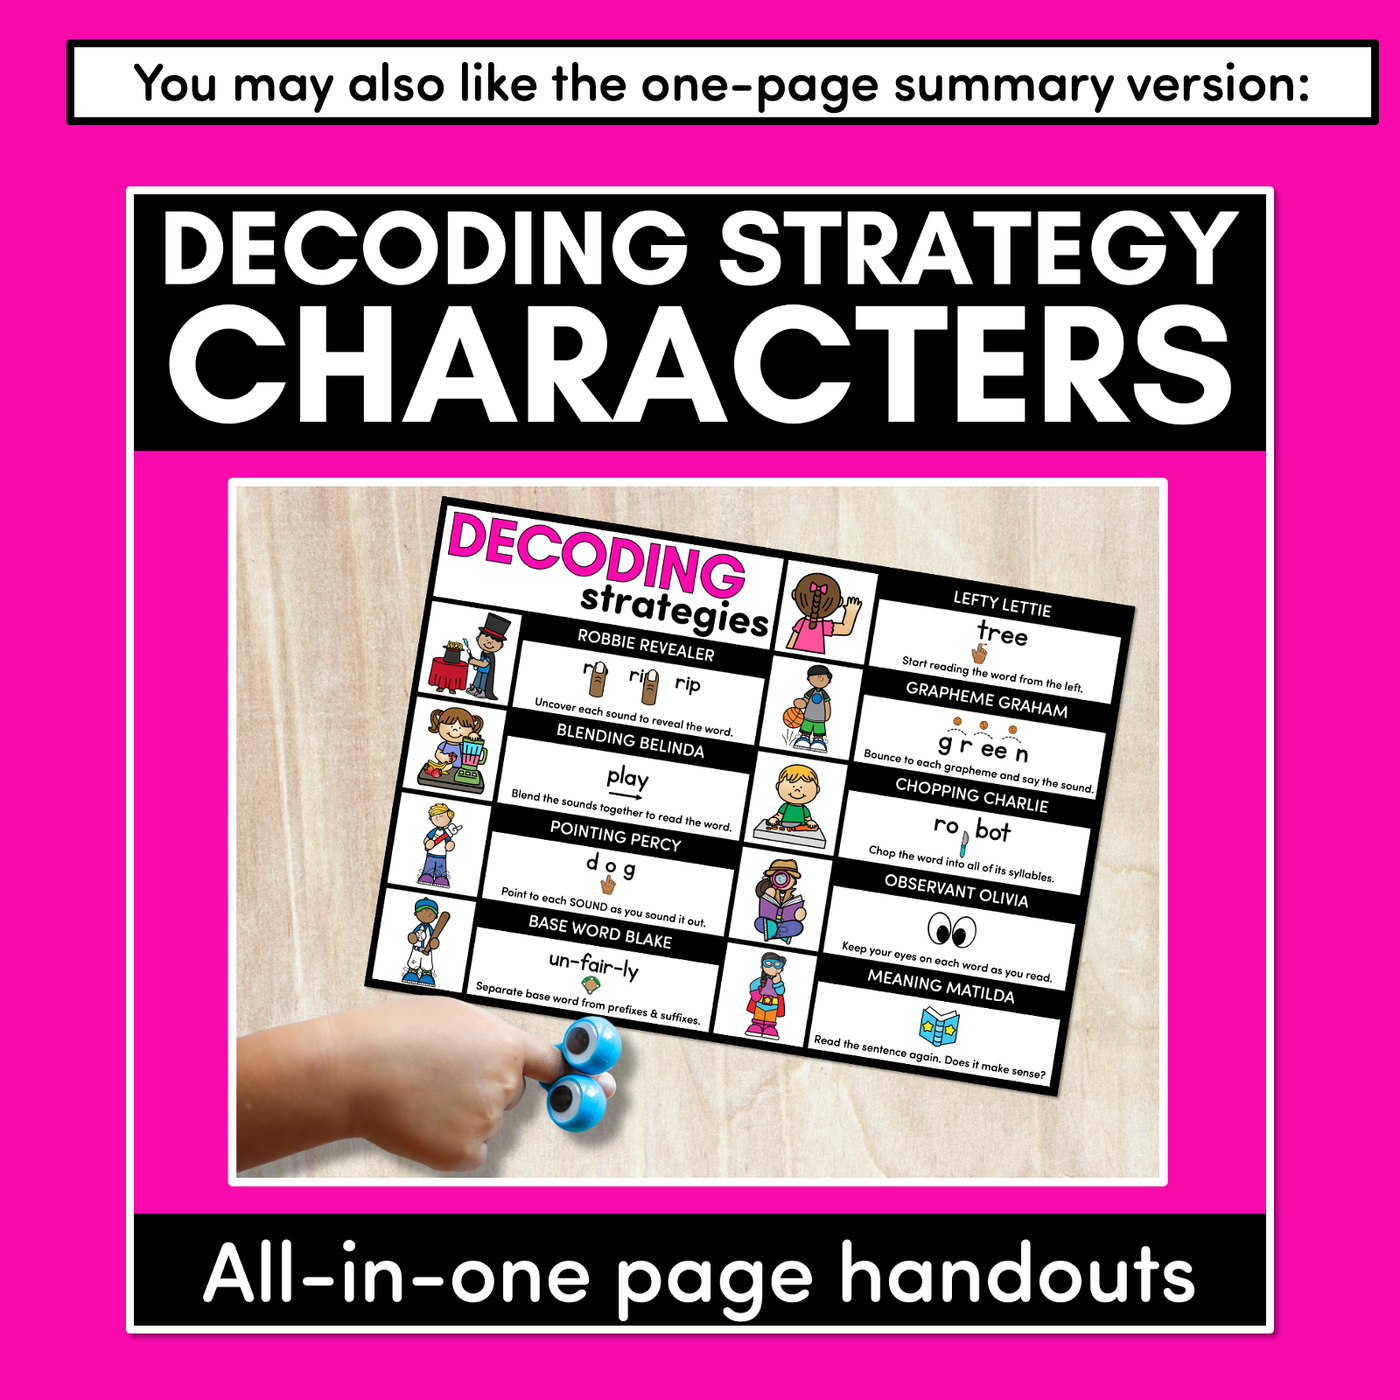 Research-Based Reading Strategy Character Posters - Decoding Strategies